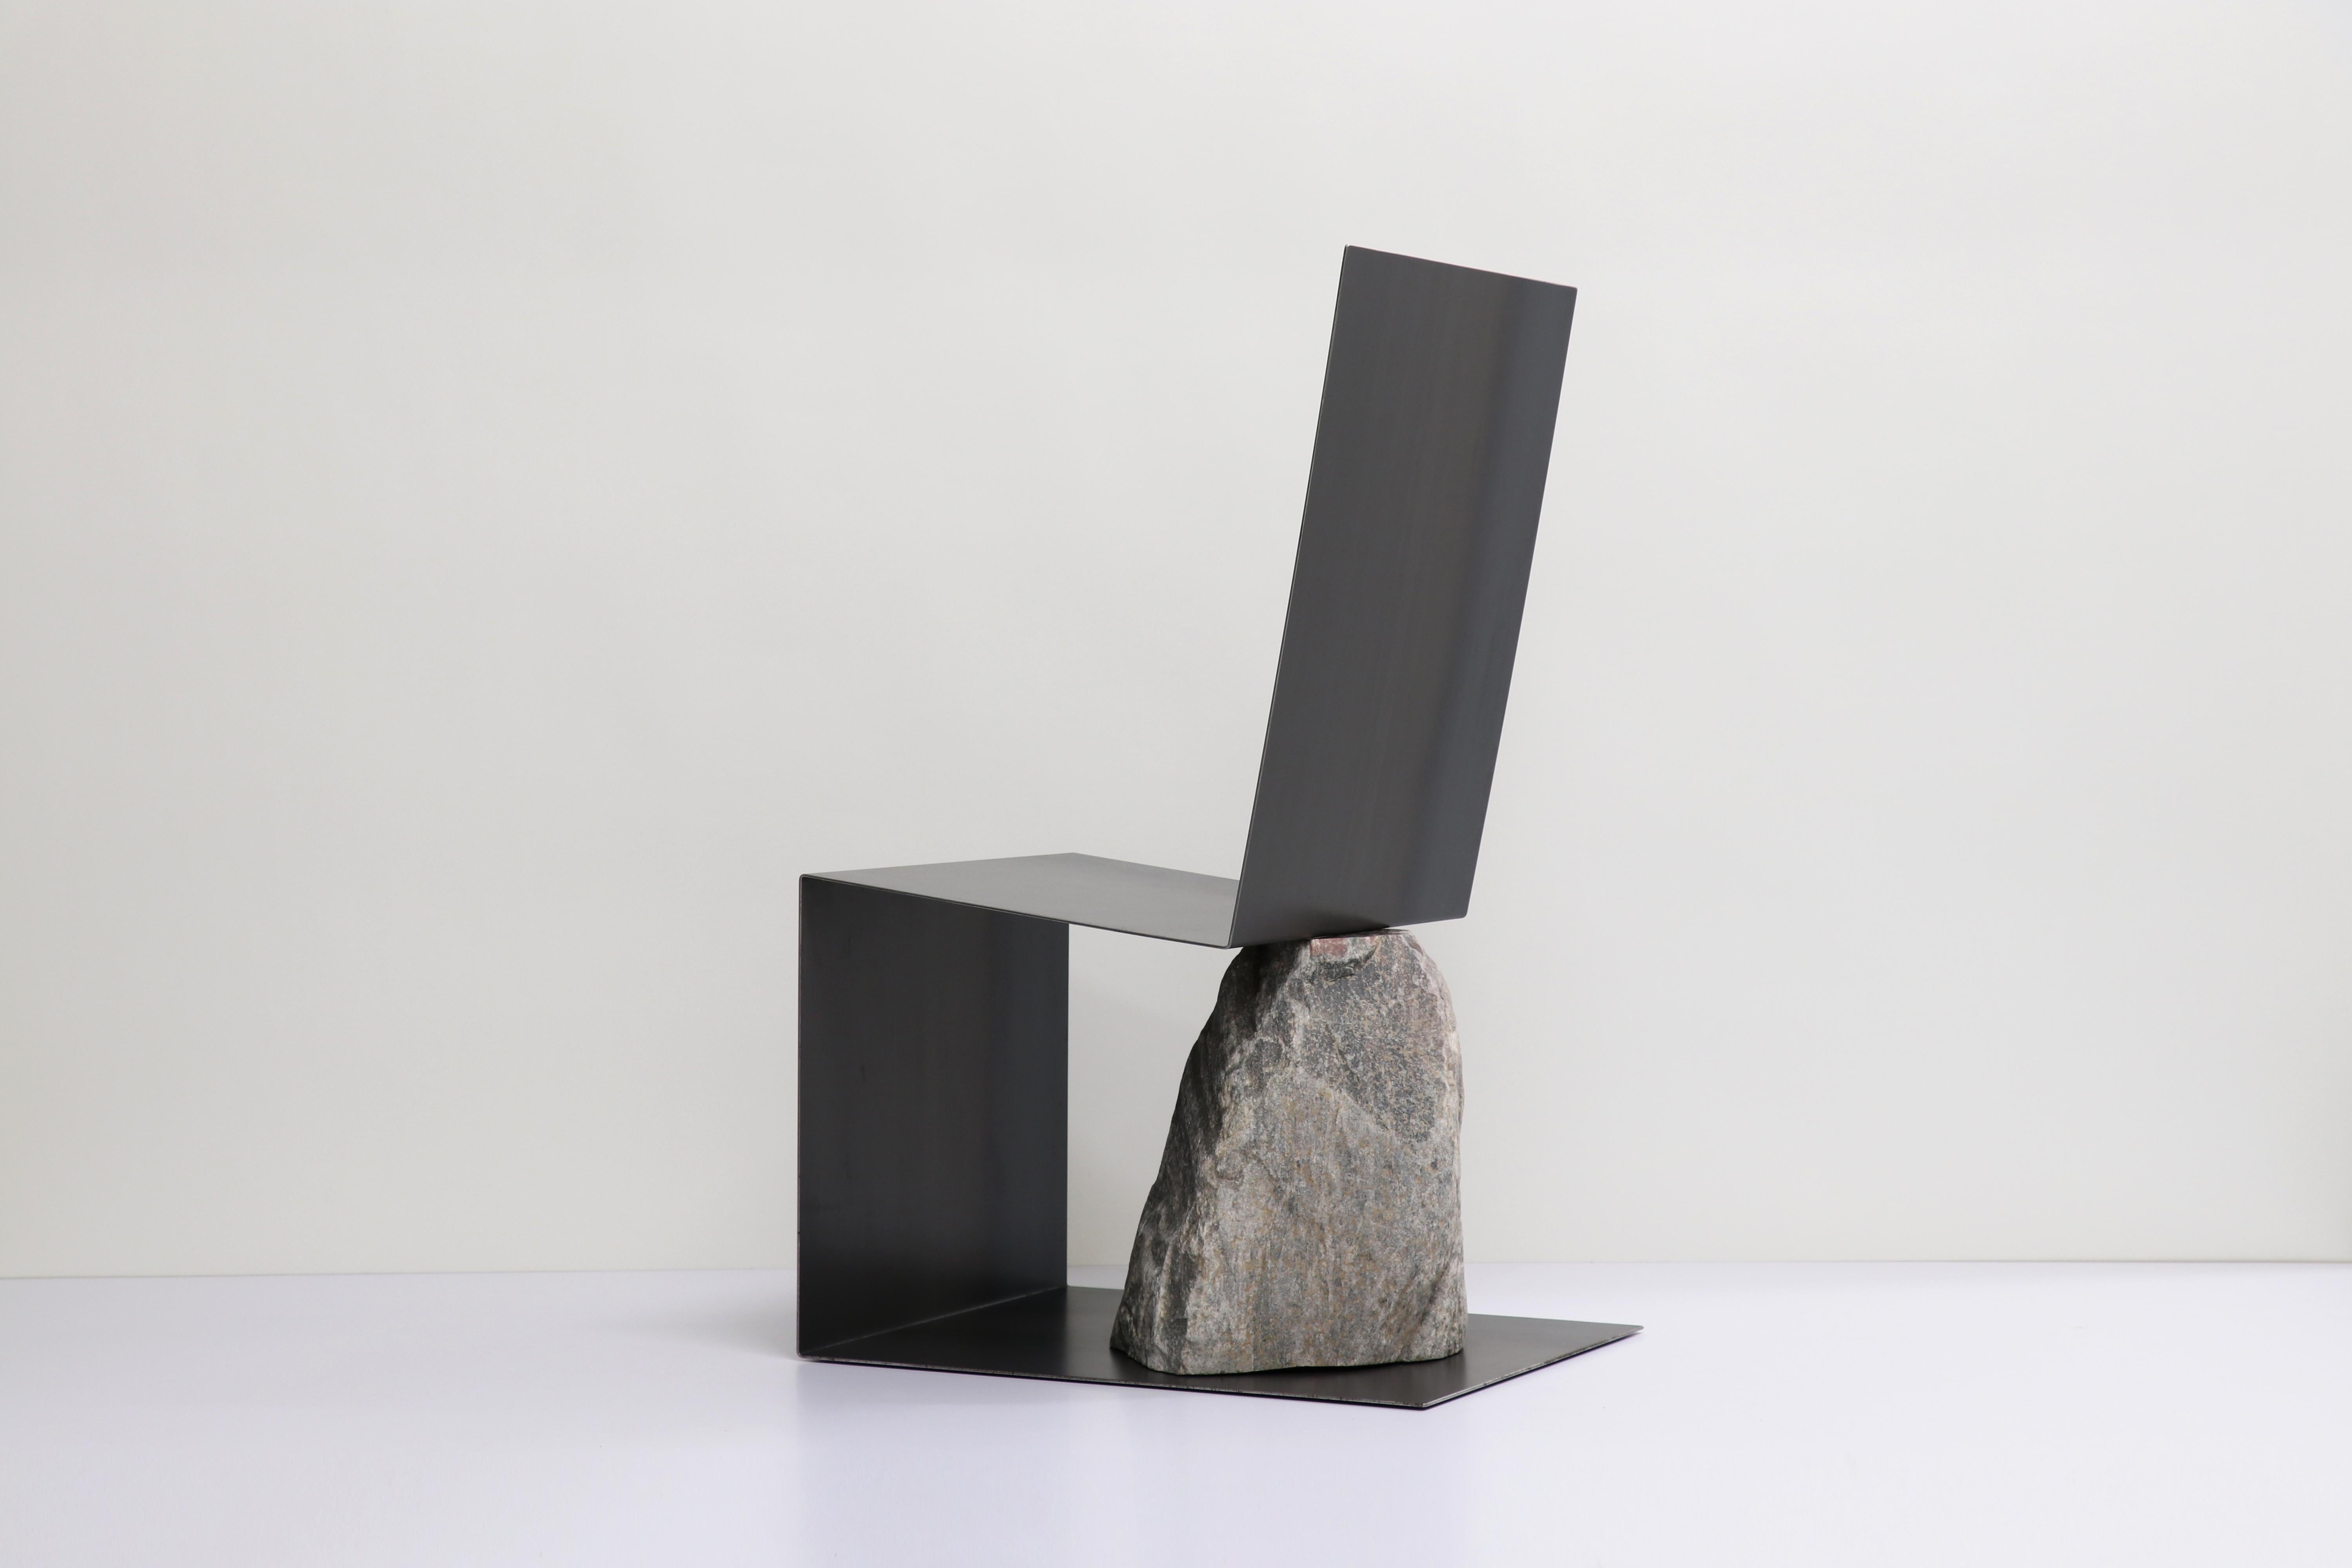 Steel and stone chair by Batten and Kamp
Shelter to Ground Collection
Dimensions: W 48 x D 61 x H 95 cm
Materials: Hand finished hot rolled steel, natural stone.

The stone is sourced first, and then the proportions of the steel adjusted to suit the